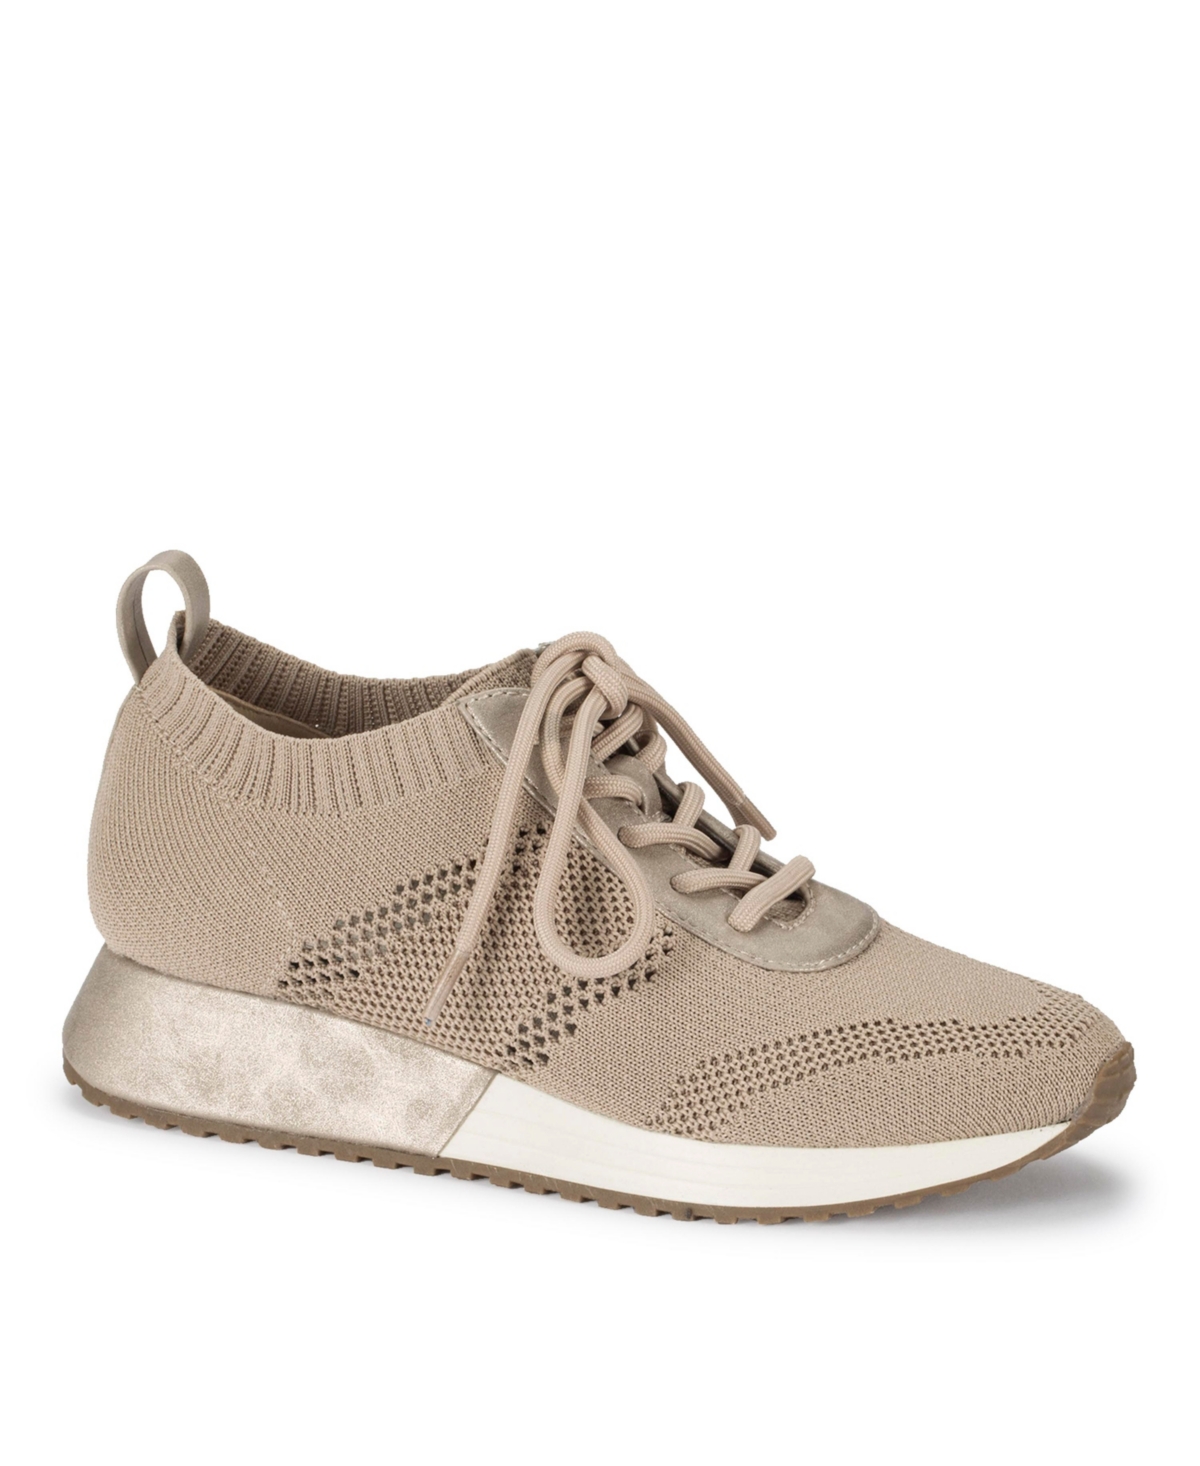 Women's Palta Lace Up Sneakers - Champagne